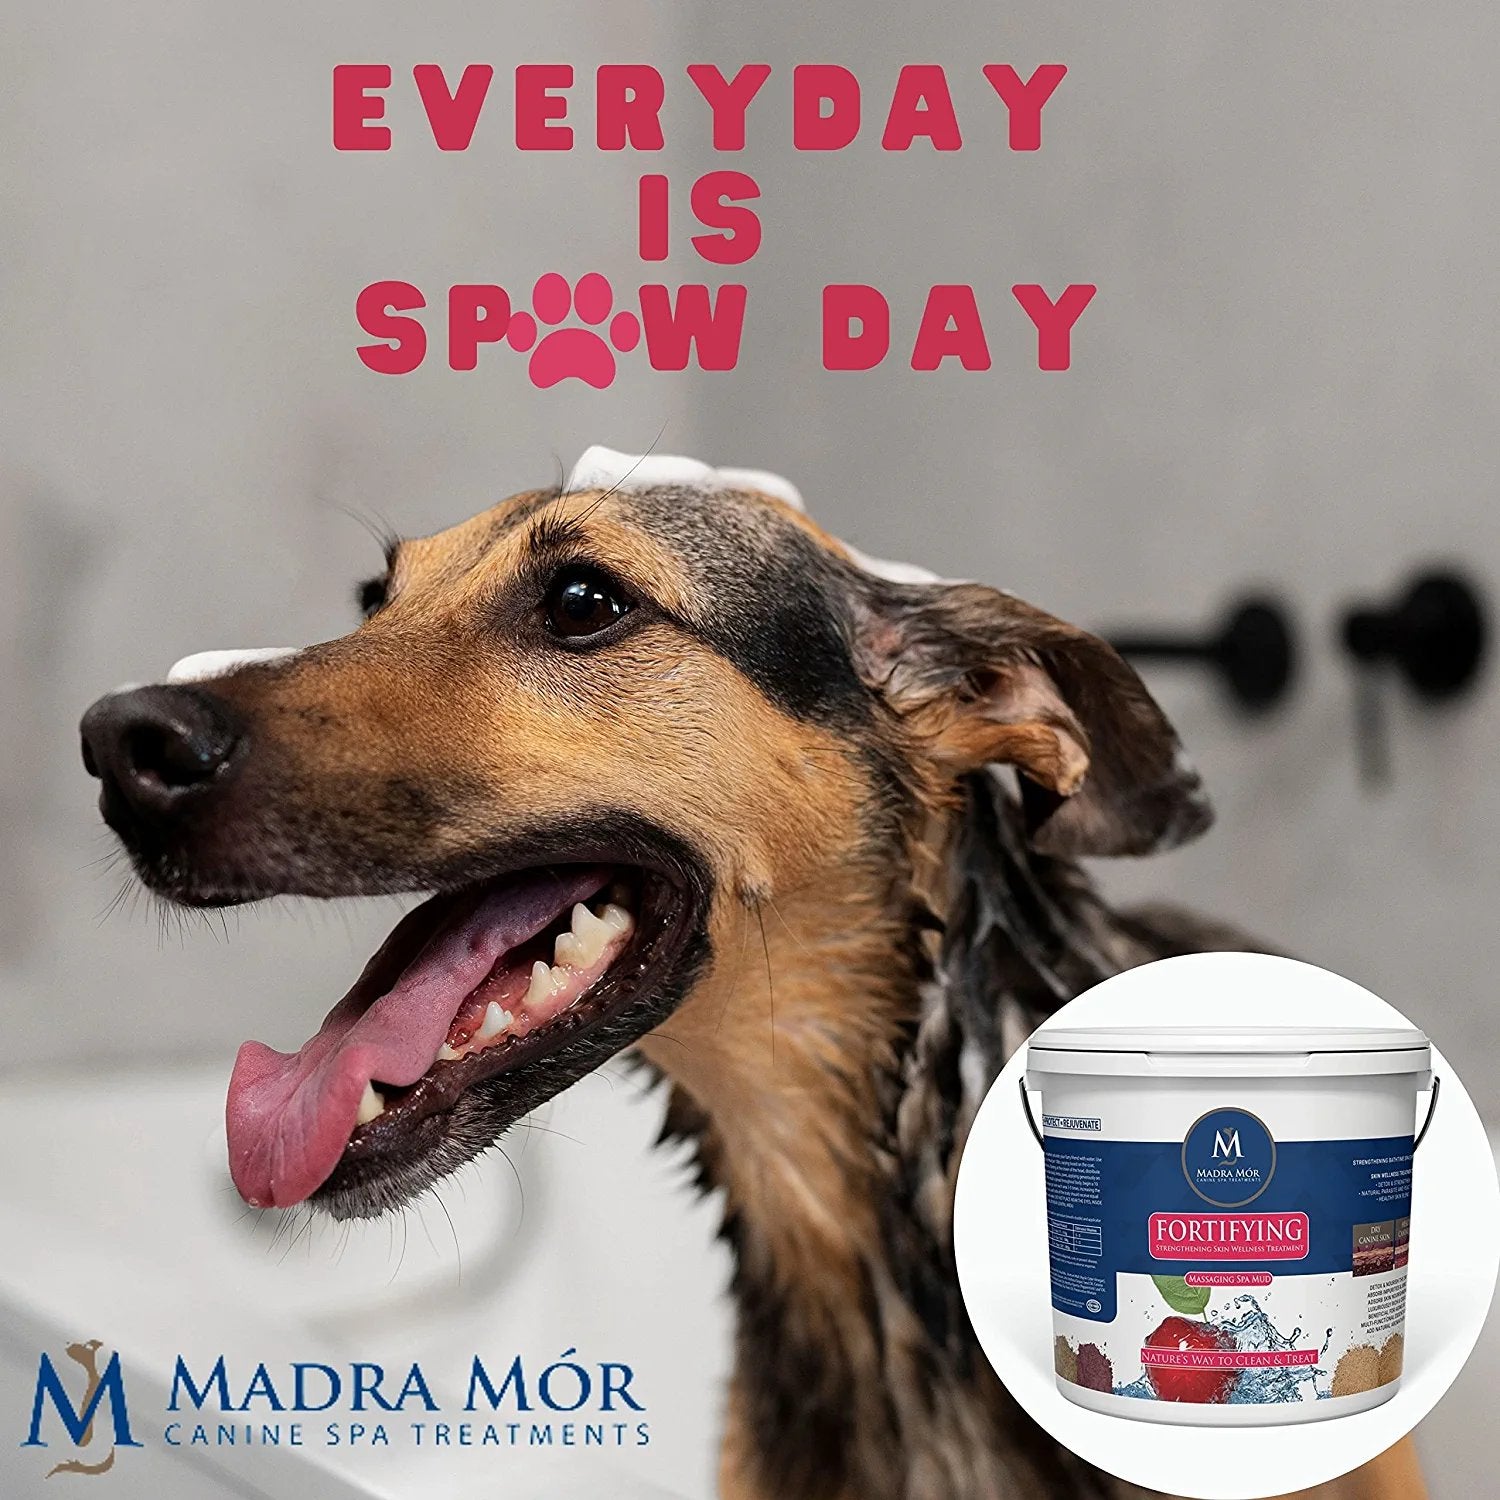 Worldwide Nutrition Madra Mor Mobility Dog Essentials Mud Bath | Dog Bath Spa Treatment for Dog Arthritis Pain Relief | Anti Itch for Dogs Wash for Dog Grooming | 7.5lb Pail w Multi Purpose Key Chain